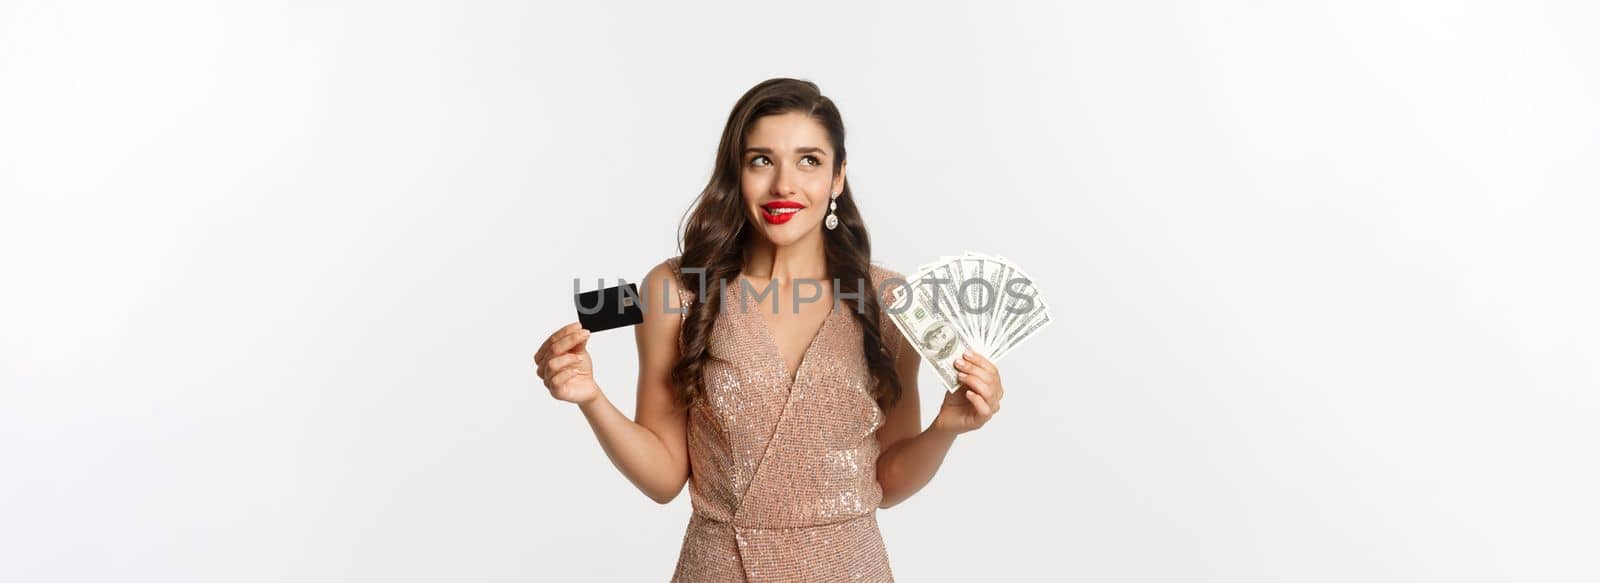 Shopping concept. Young woman deciding what to buy, looking thoughtful at upper left corner and showing credit card with money, standing in party dress.